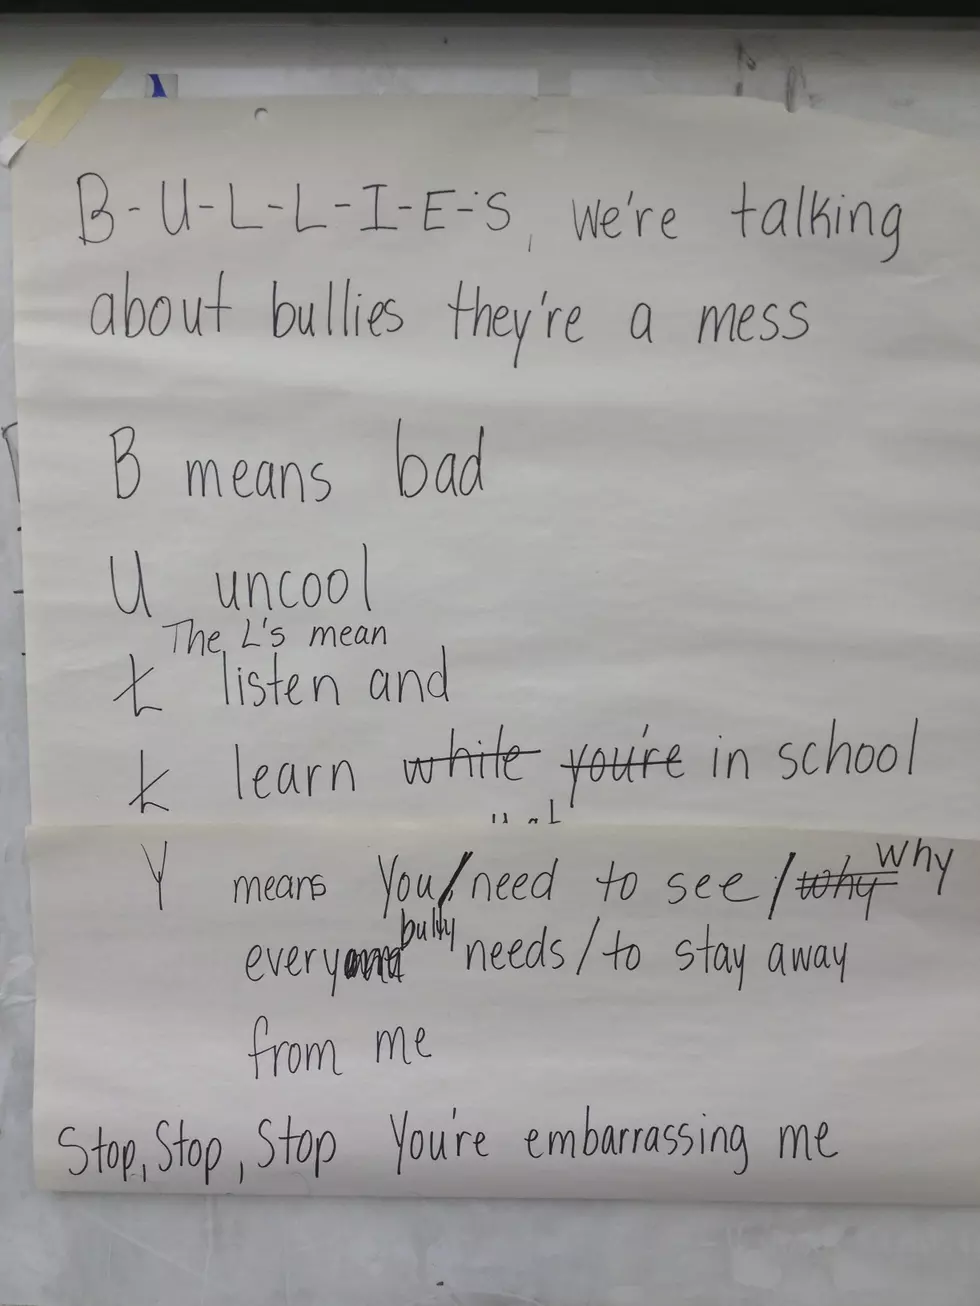 Should Parents Be Fined For Bullying Kids?  Monona, Wisconsin Officials Say &#8220;Yes&#8221;